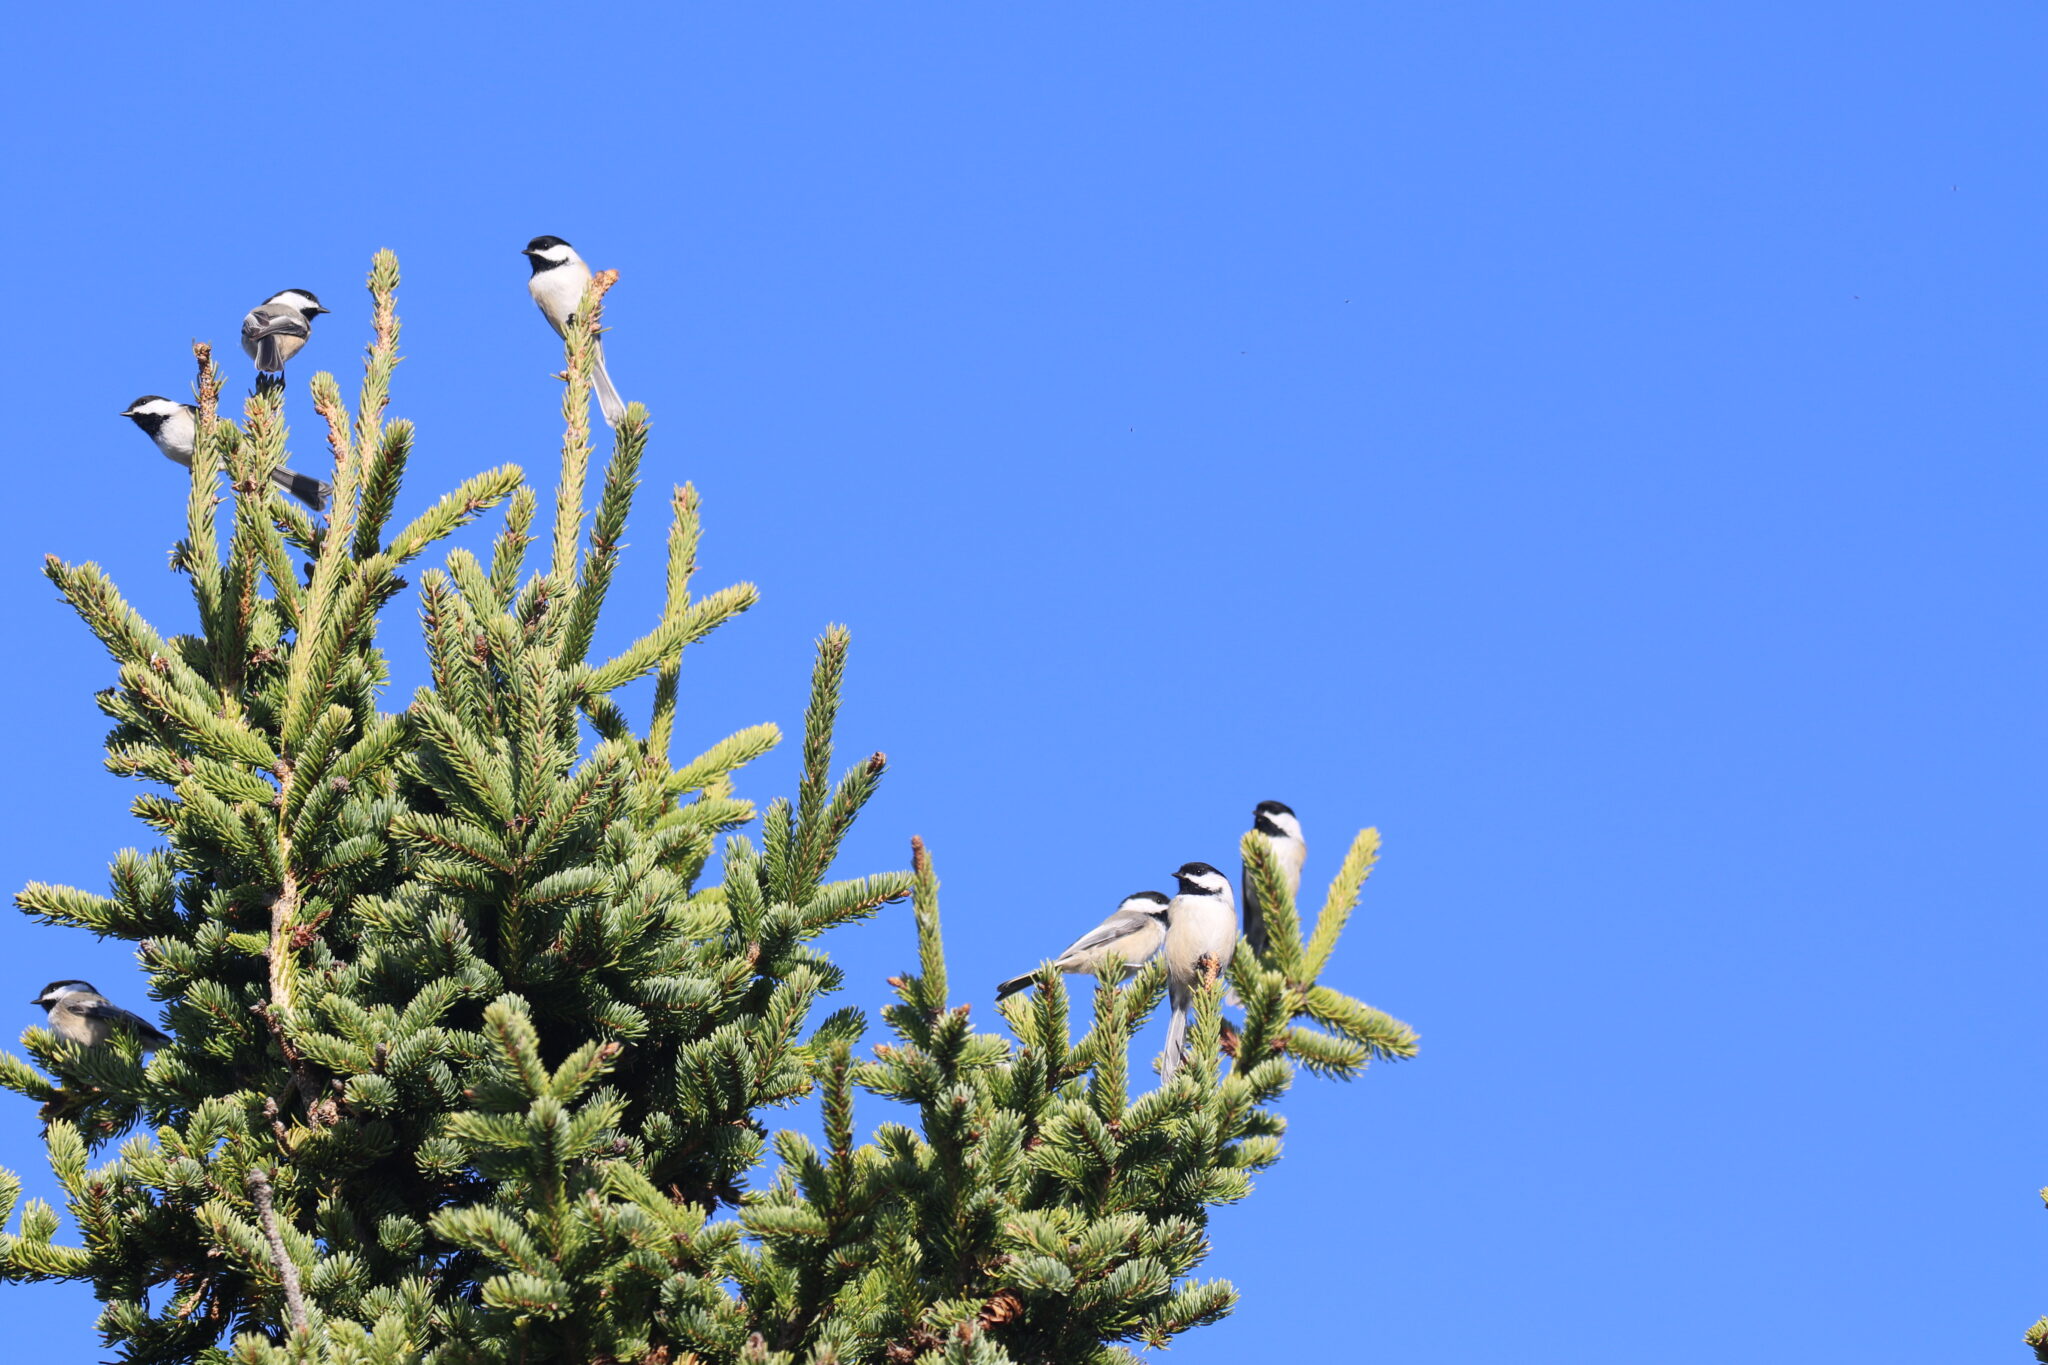 Seven chickadees perch on the ends of spruce branches before a blue sky.